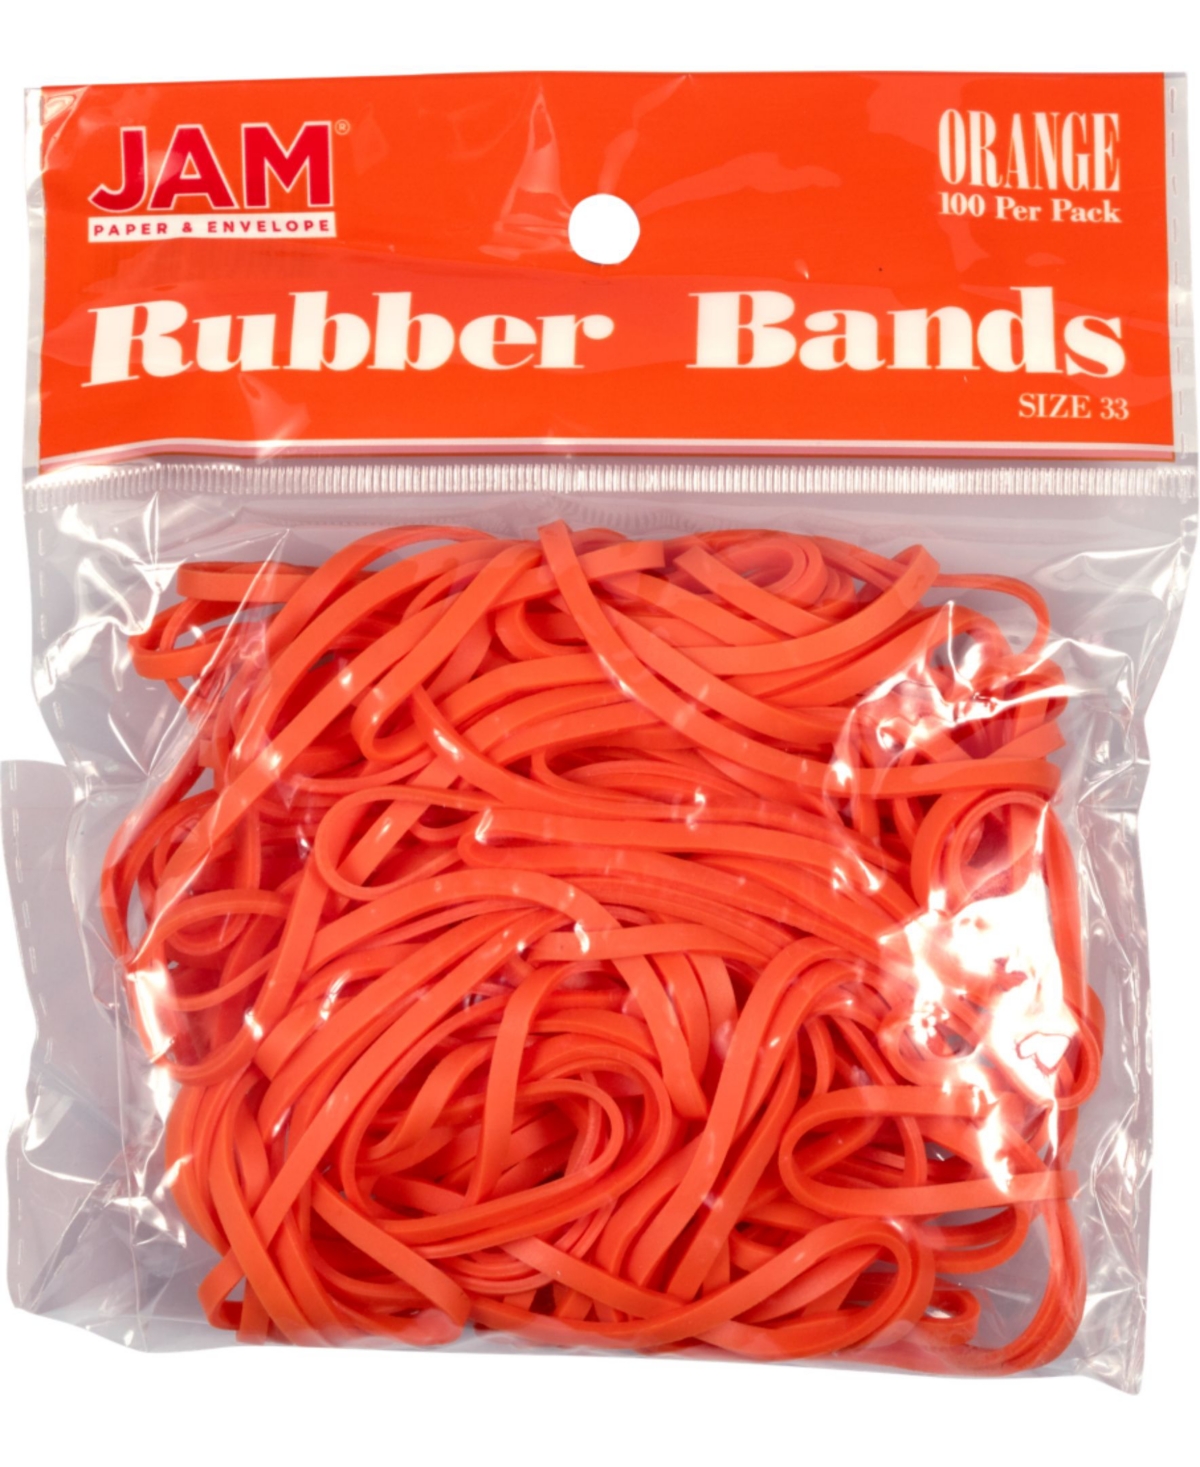 Jam Paper Colorful Rubber Bands In Orange